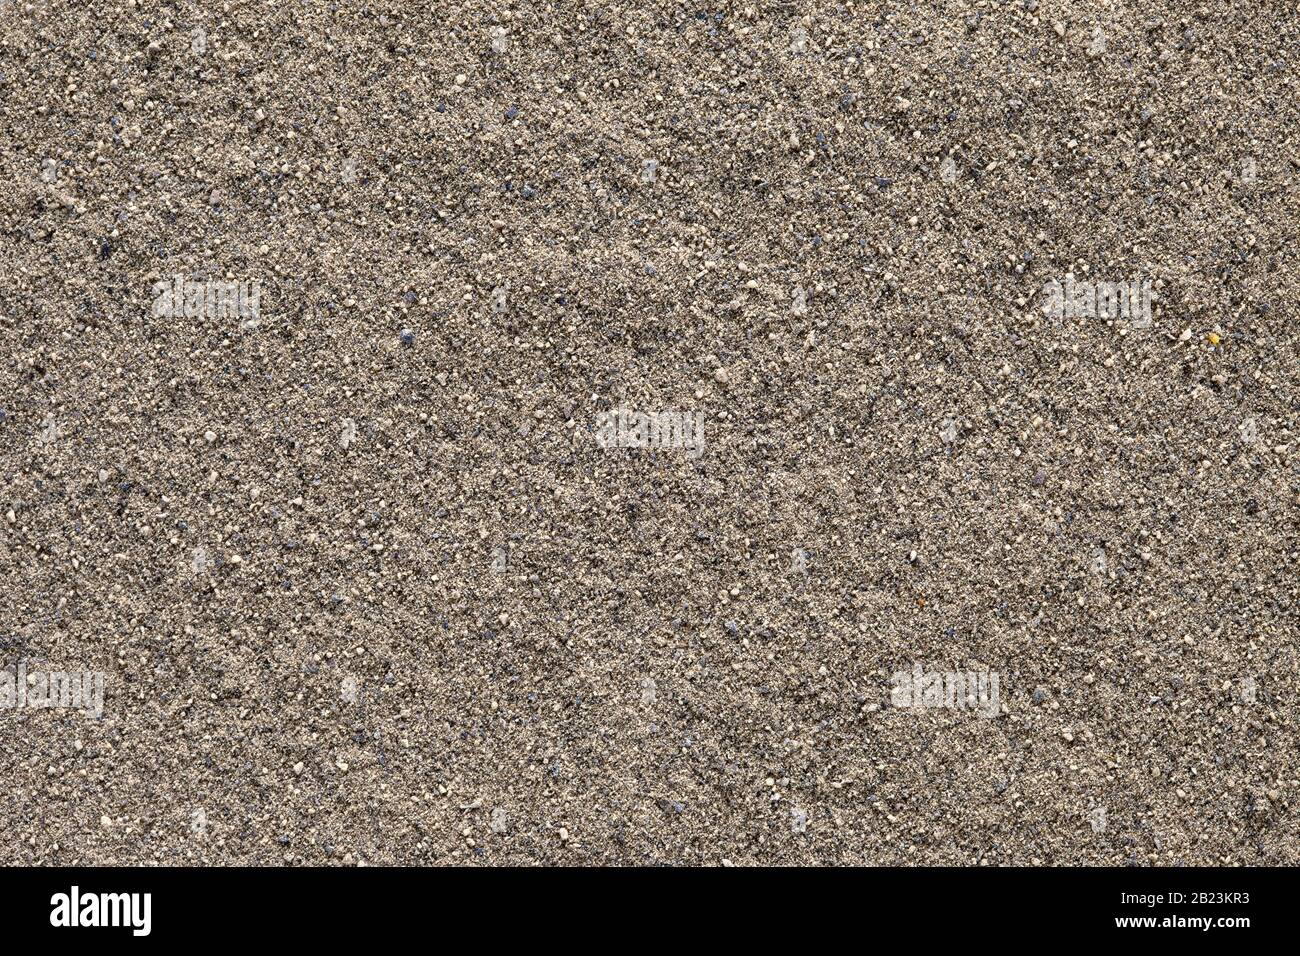 Ground black pepper (Piper nigrum) texture, full frame background. Used as a spice in cuisines all over the world. The plant is also used in medicine. Stock Photo